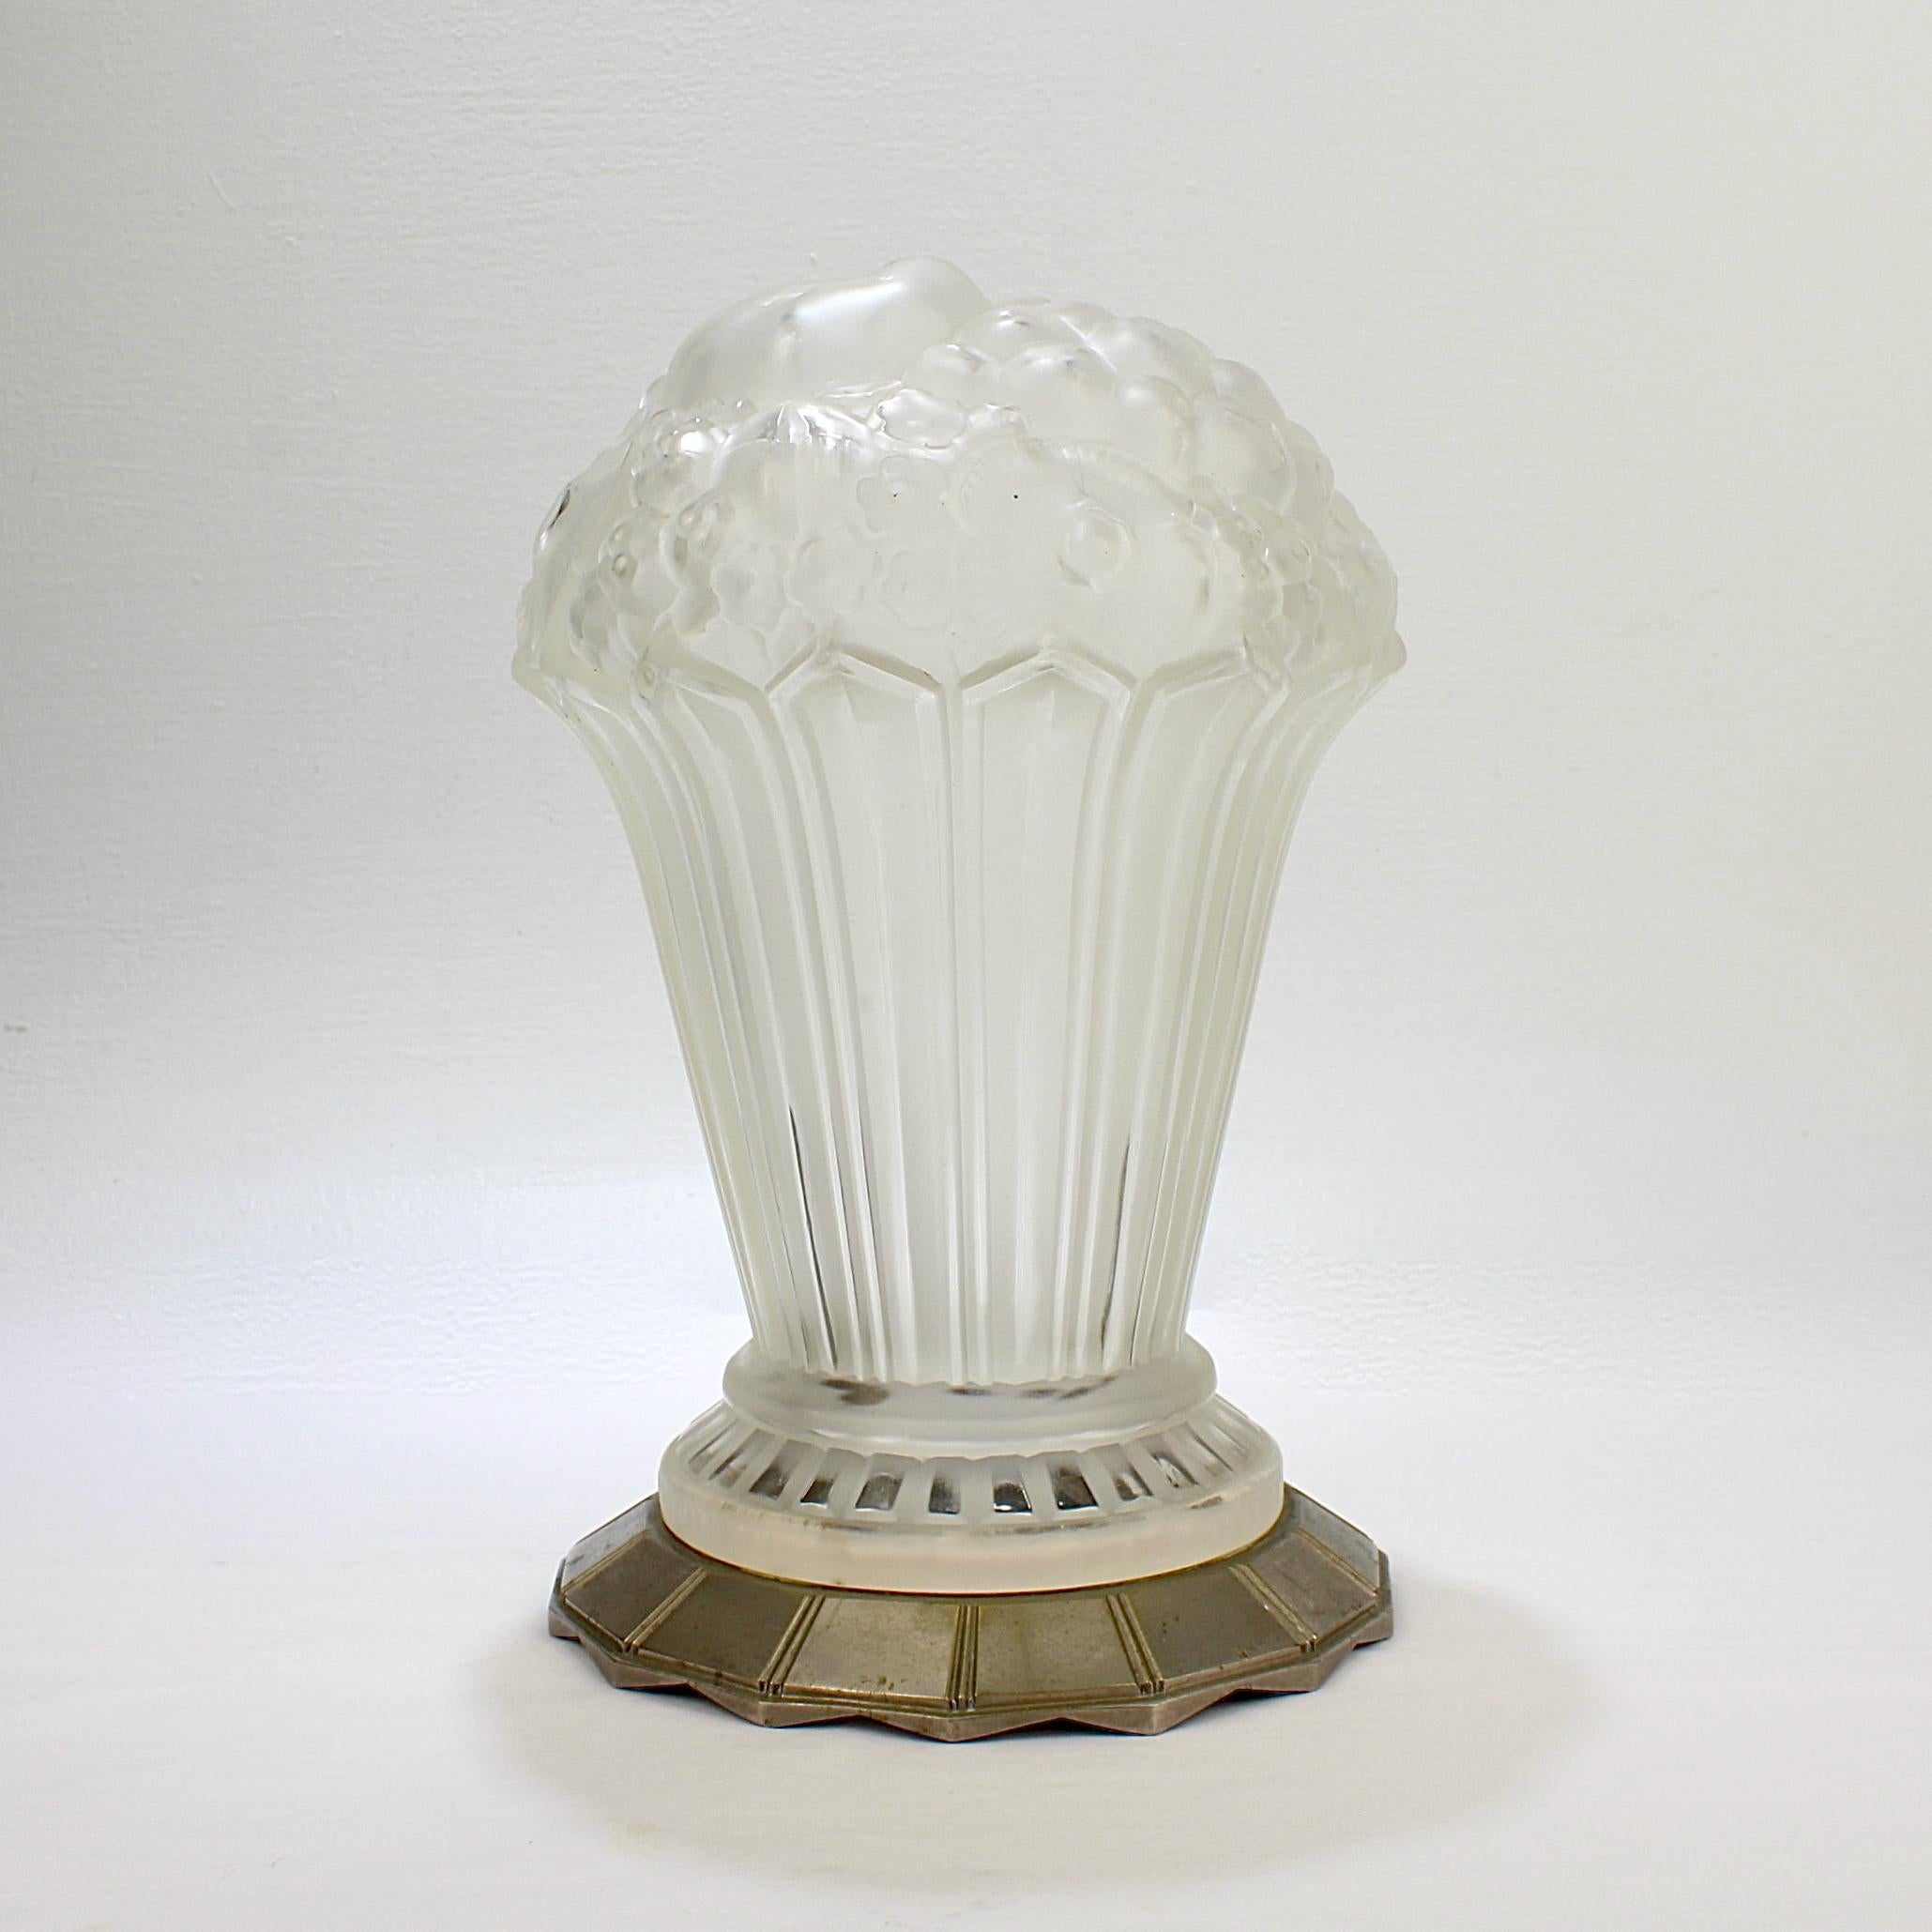 An extraordinarily fine and rare French art glass table lamp shade.

The shade is constructed of molded and frosted glass in the form of a floral and fruit bouquet and supported by a nickel-plated bronze base.

It was made by the French Art Deco